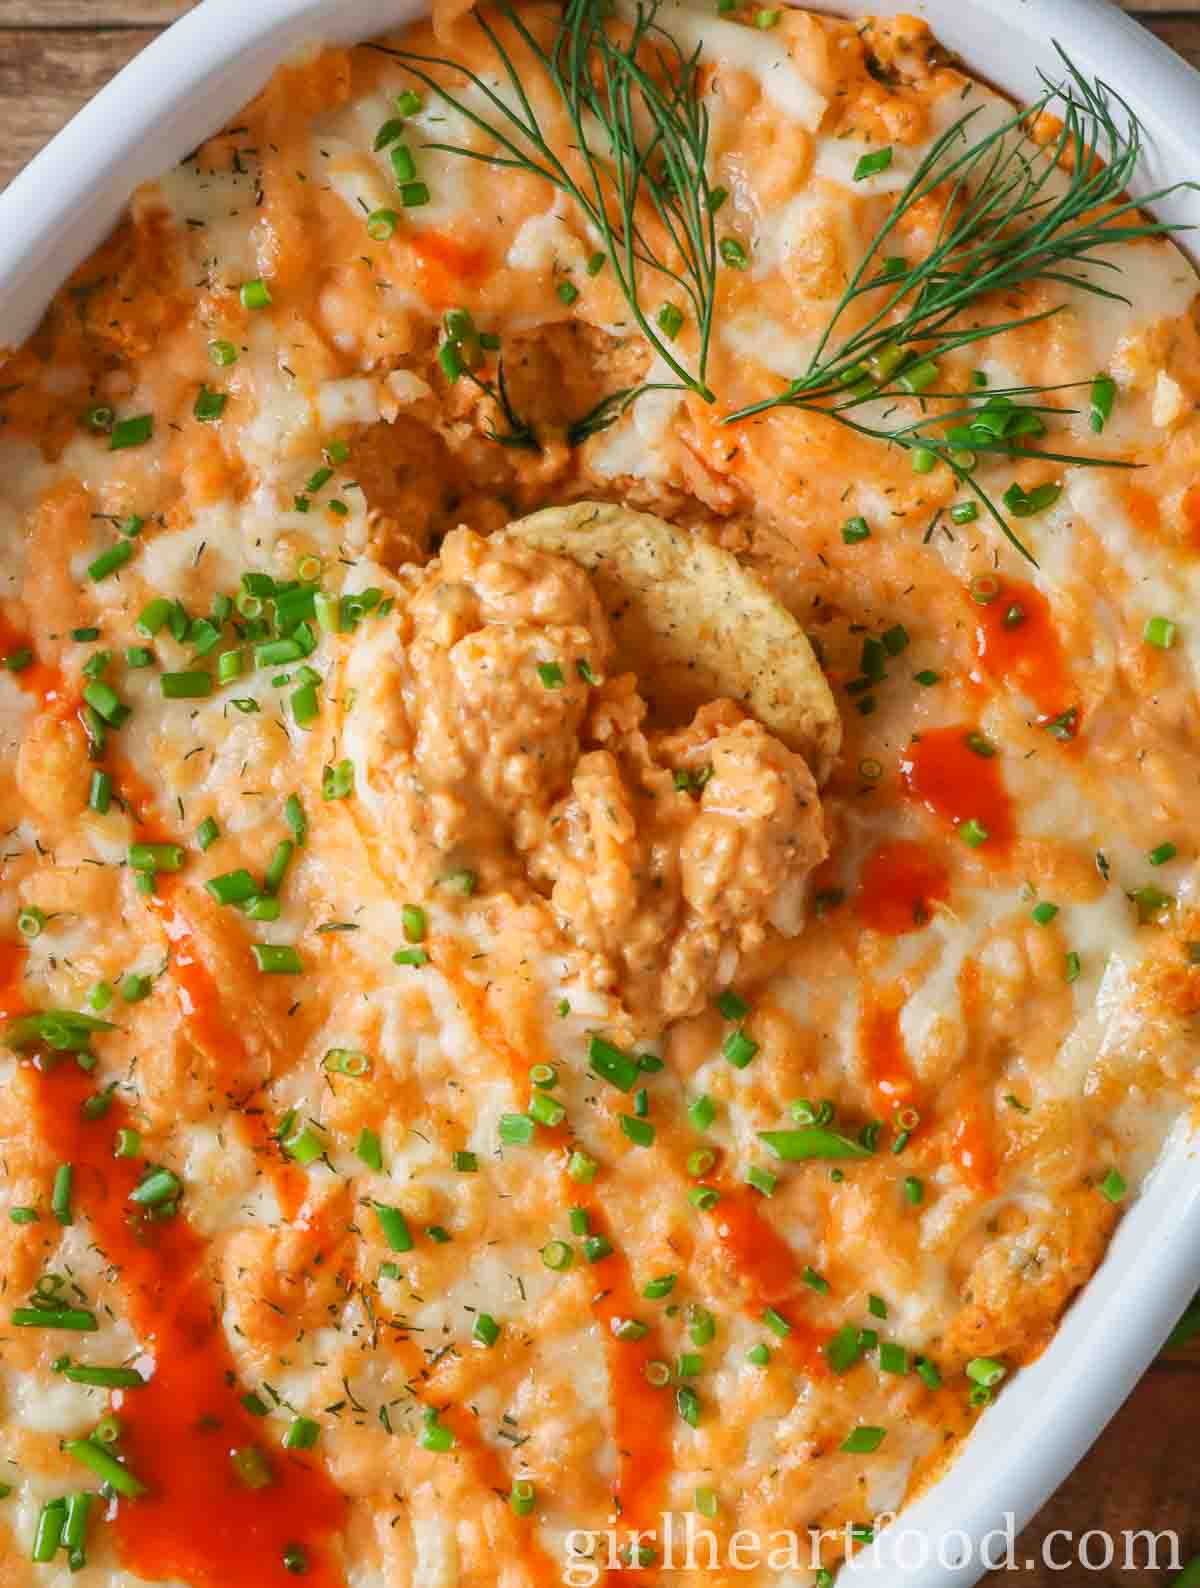 Round tortilla chip dunked into buffalo dip.